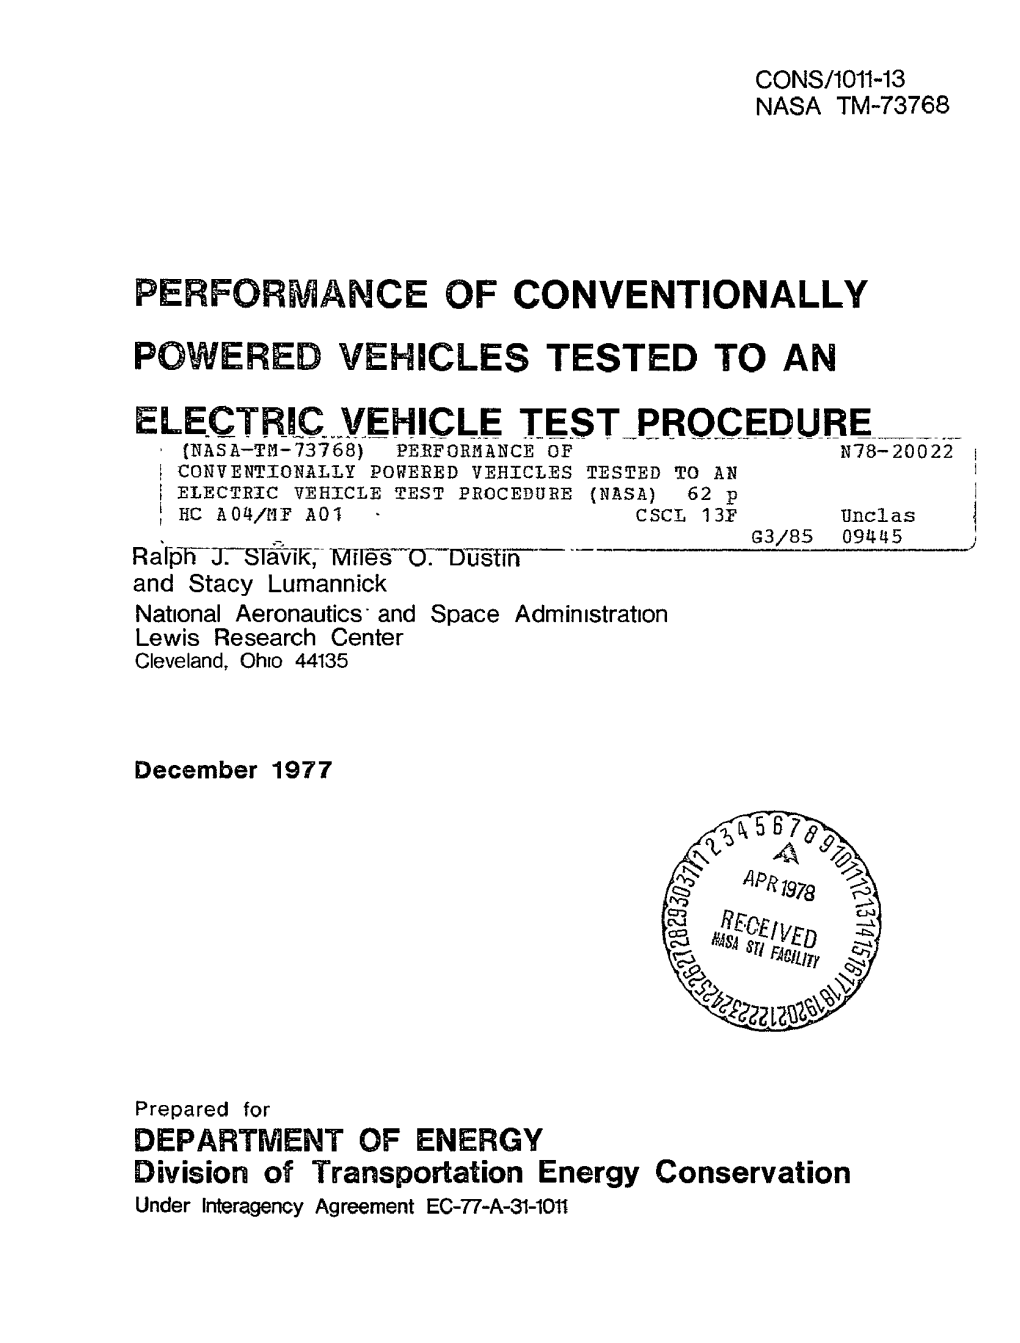 Performance of Conventionally Powered